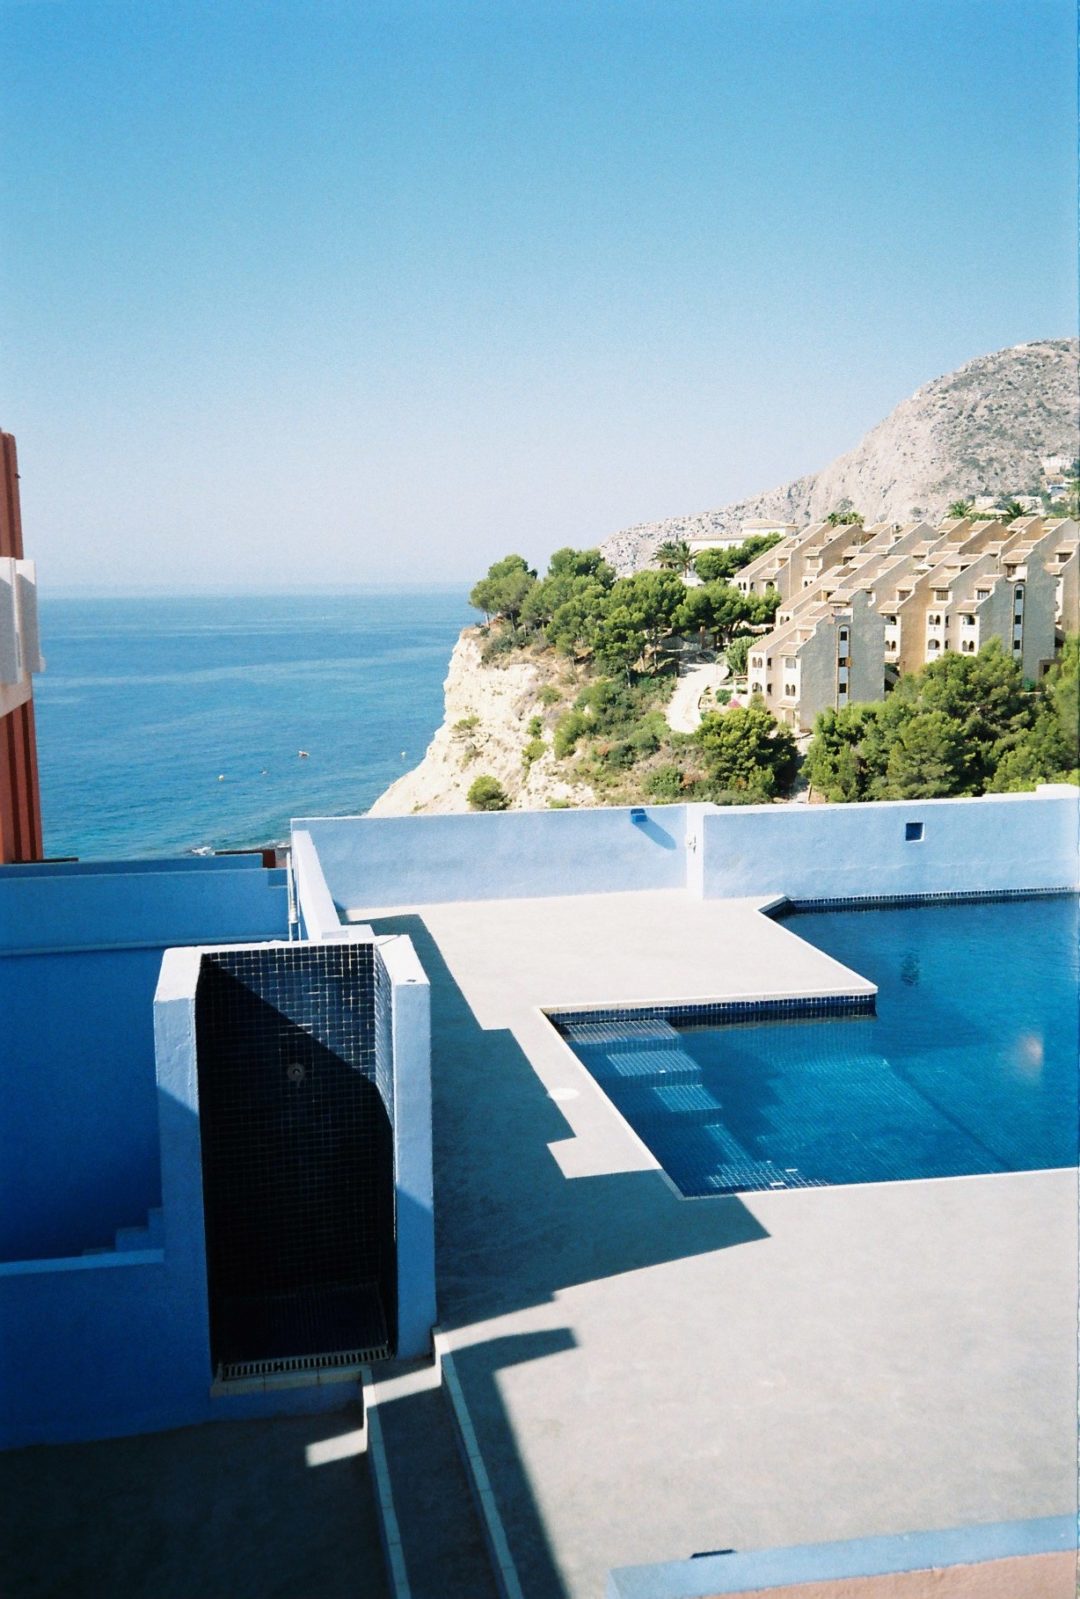 Constructivism and color: The Muralla Roja of Calpe by Bofill.